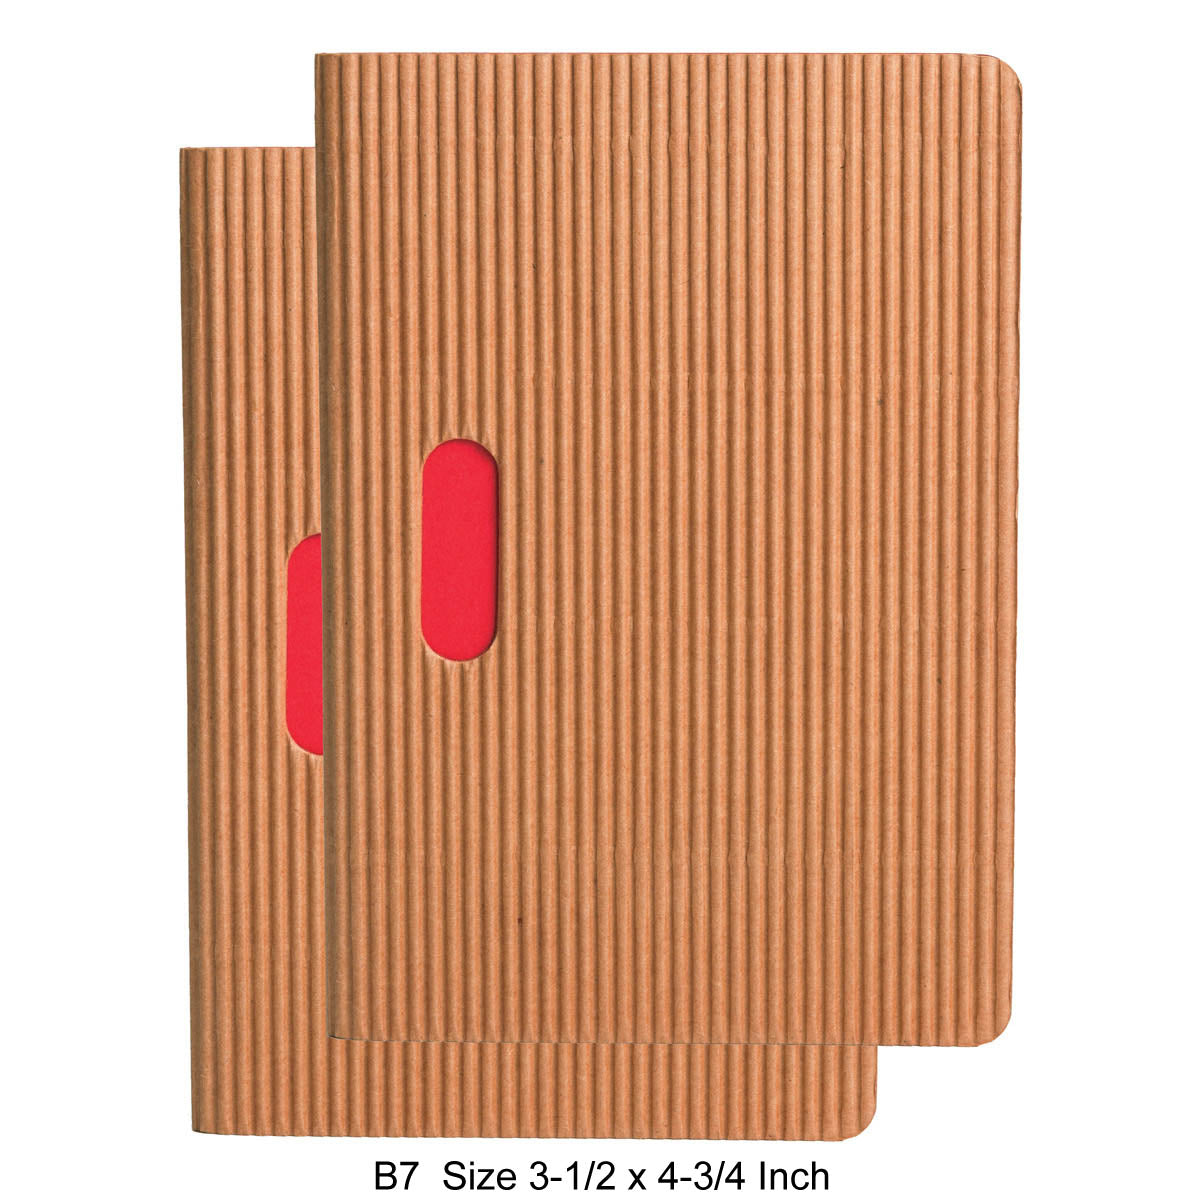 Paper-Oh Ondulo Cahier Notebook B7 Size Set of 2